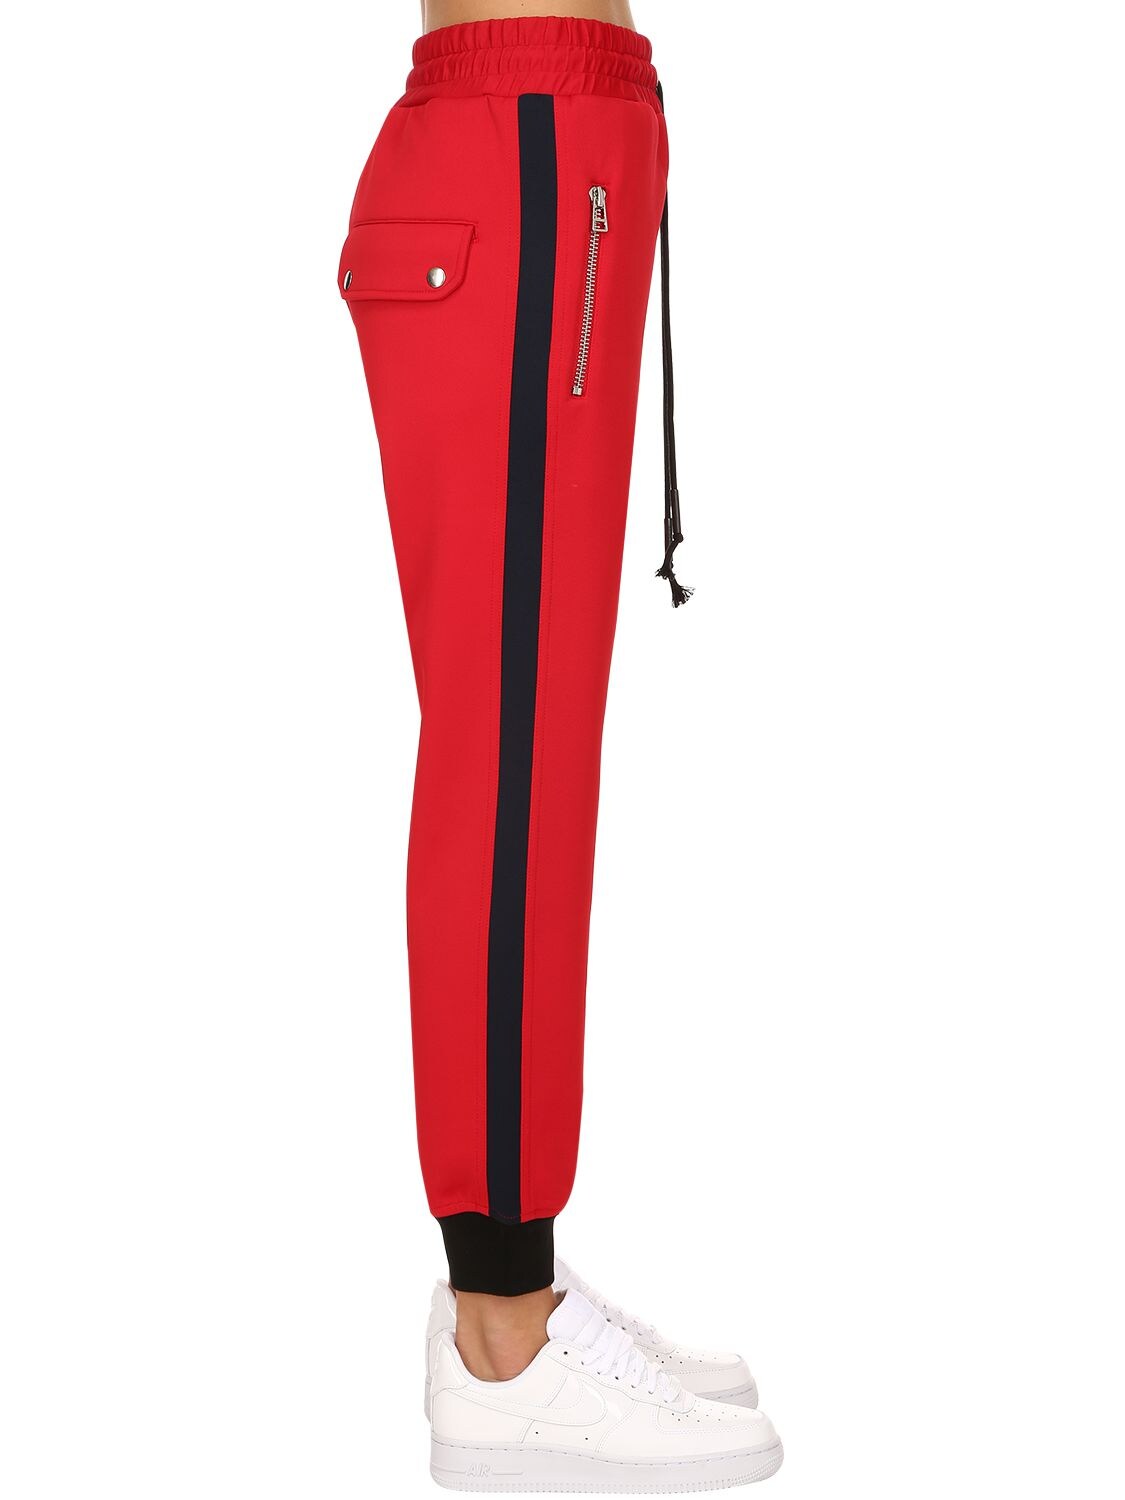 Dim Mak Collection Nadya Piqué Track Pants In Red